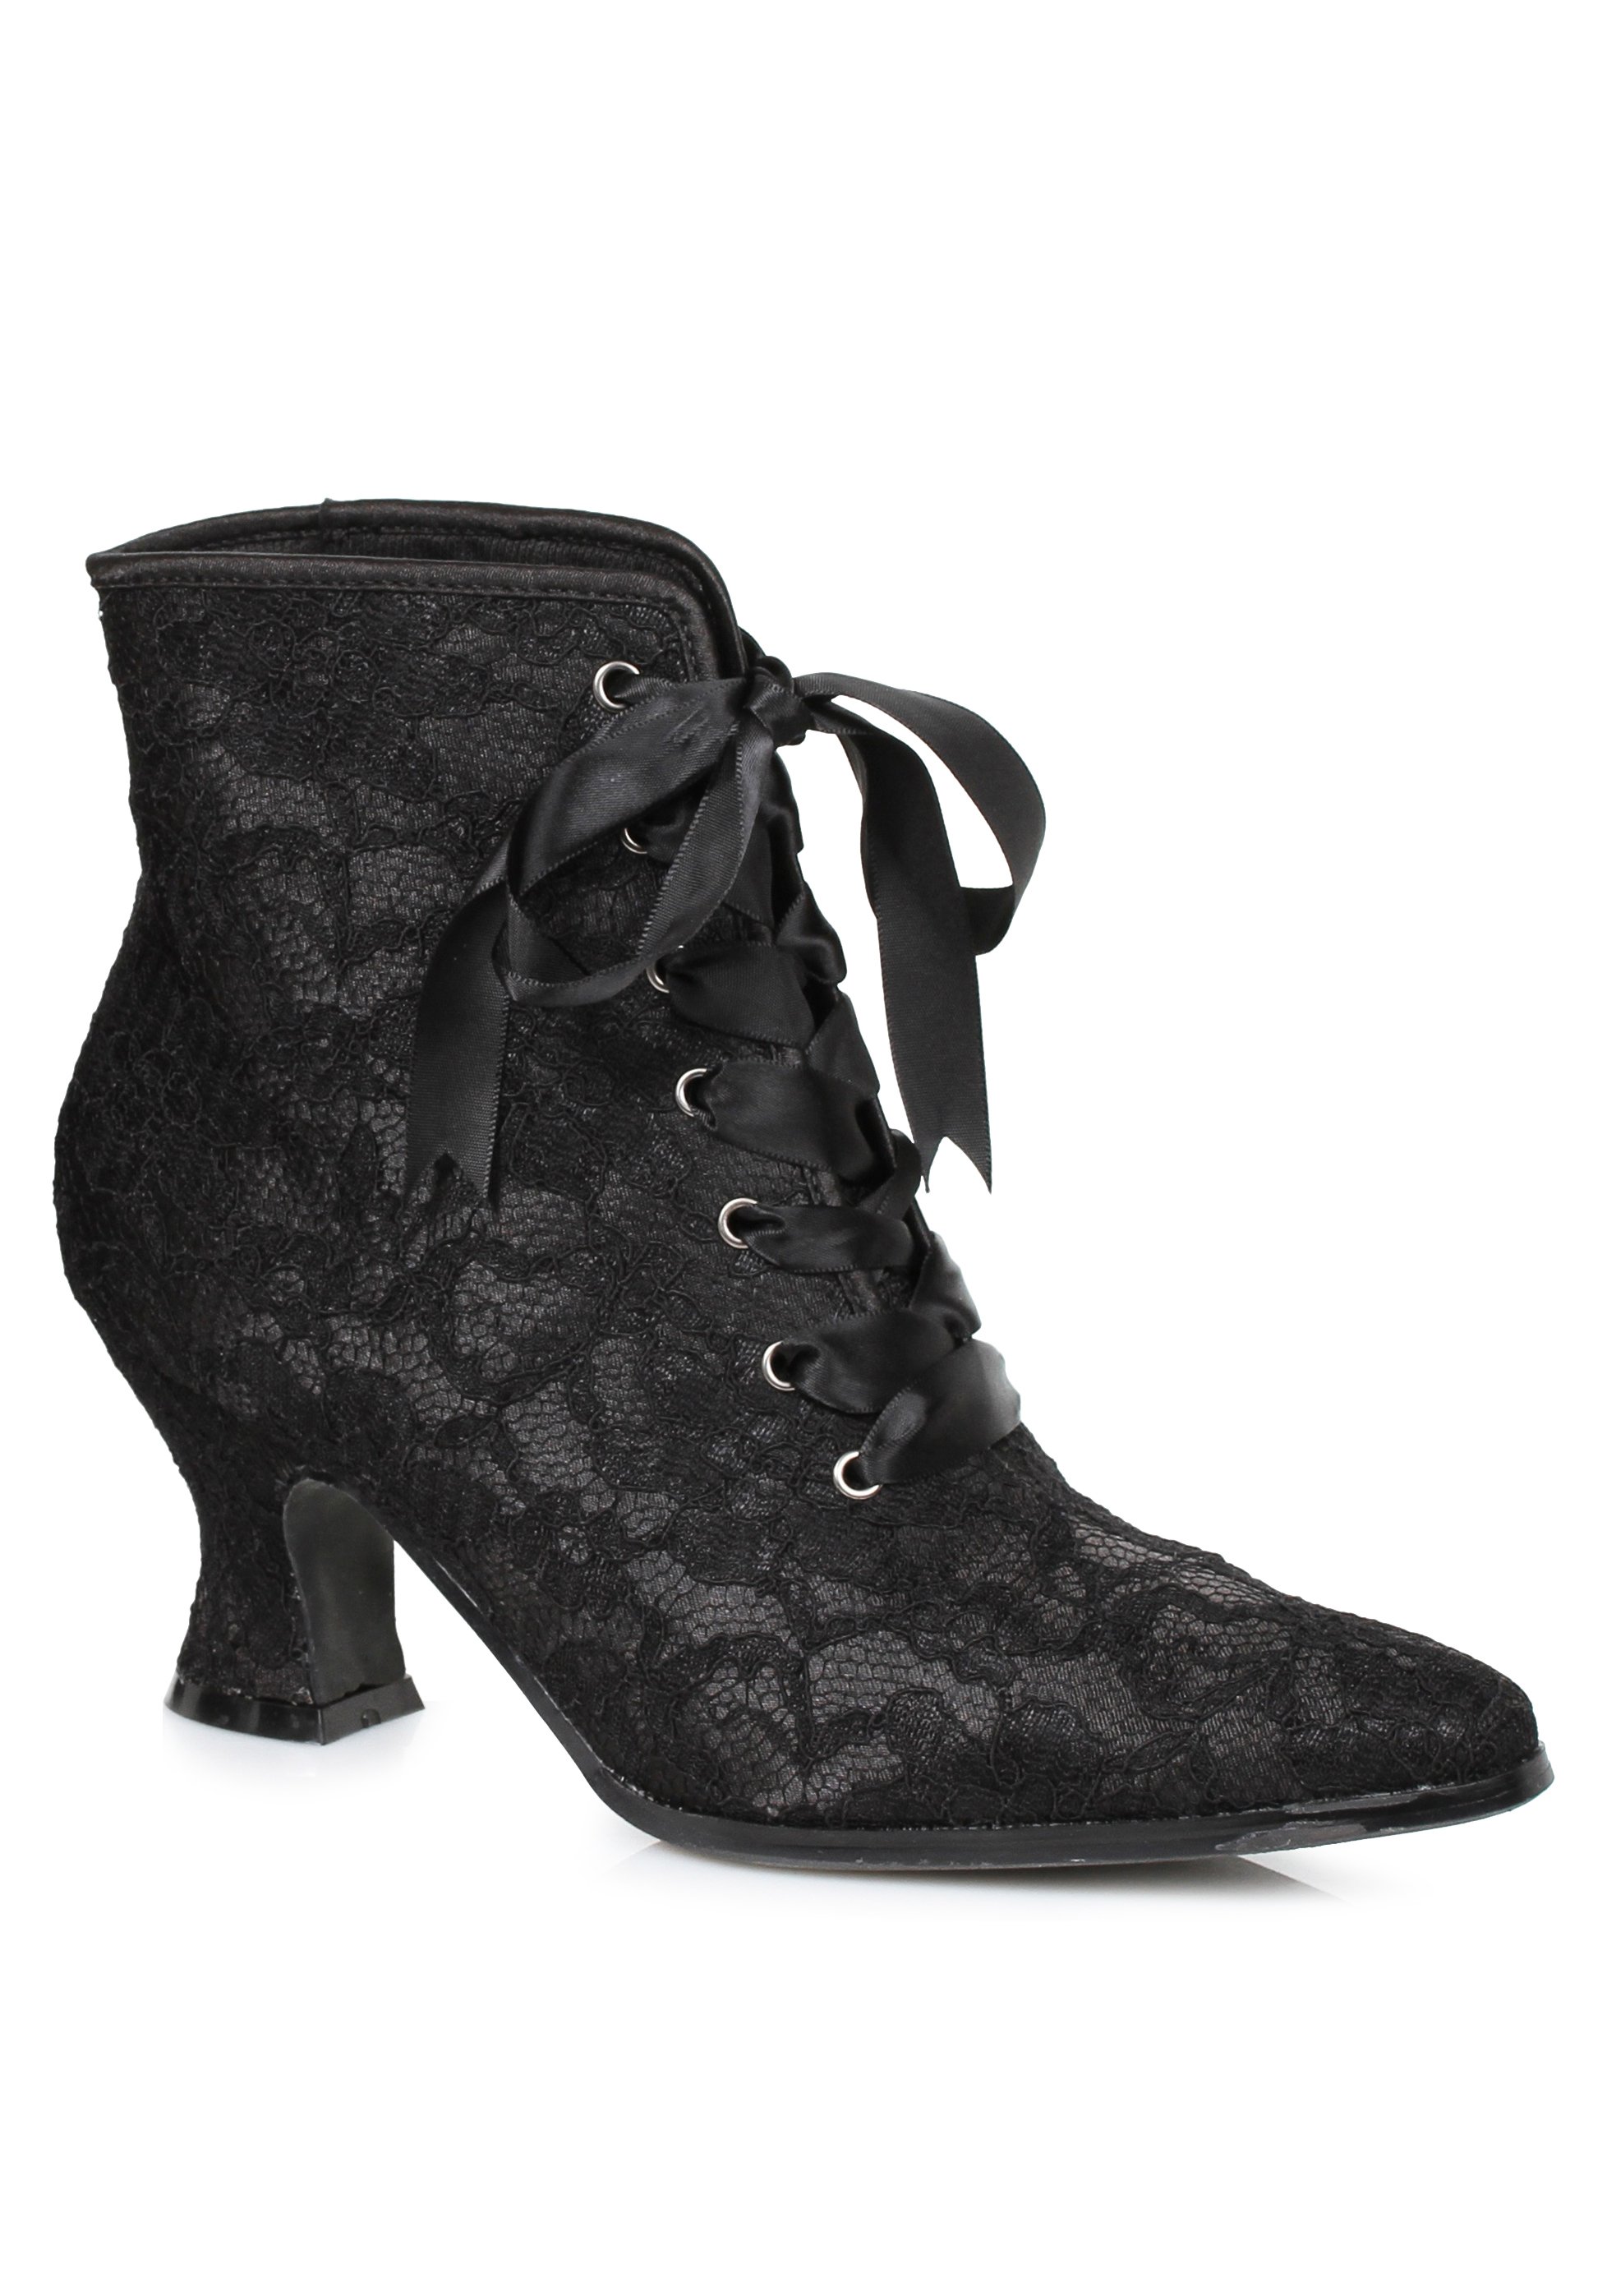 Ellie Shoes 253-REBECCA Women's 2 1/2 Inch Heel Boot With Lace